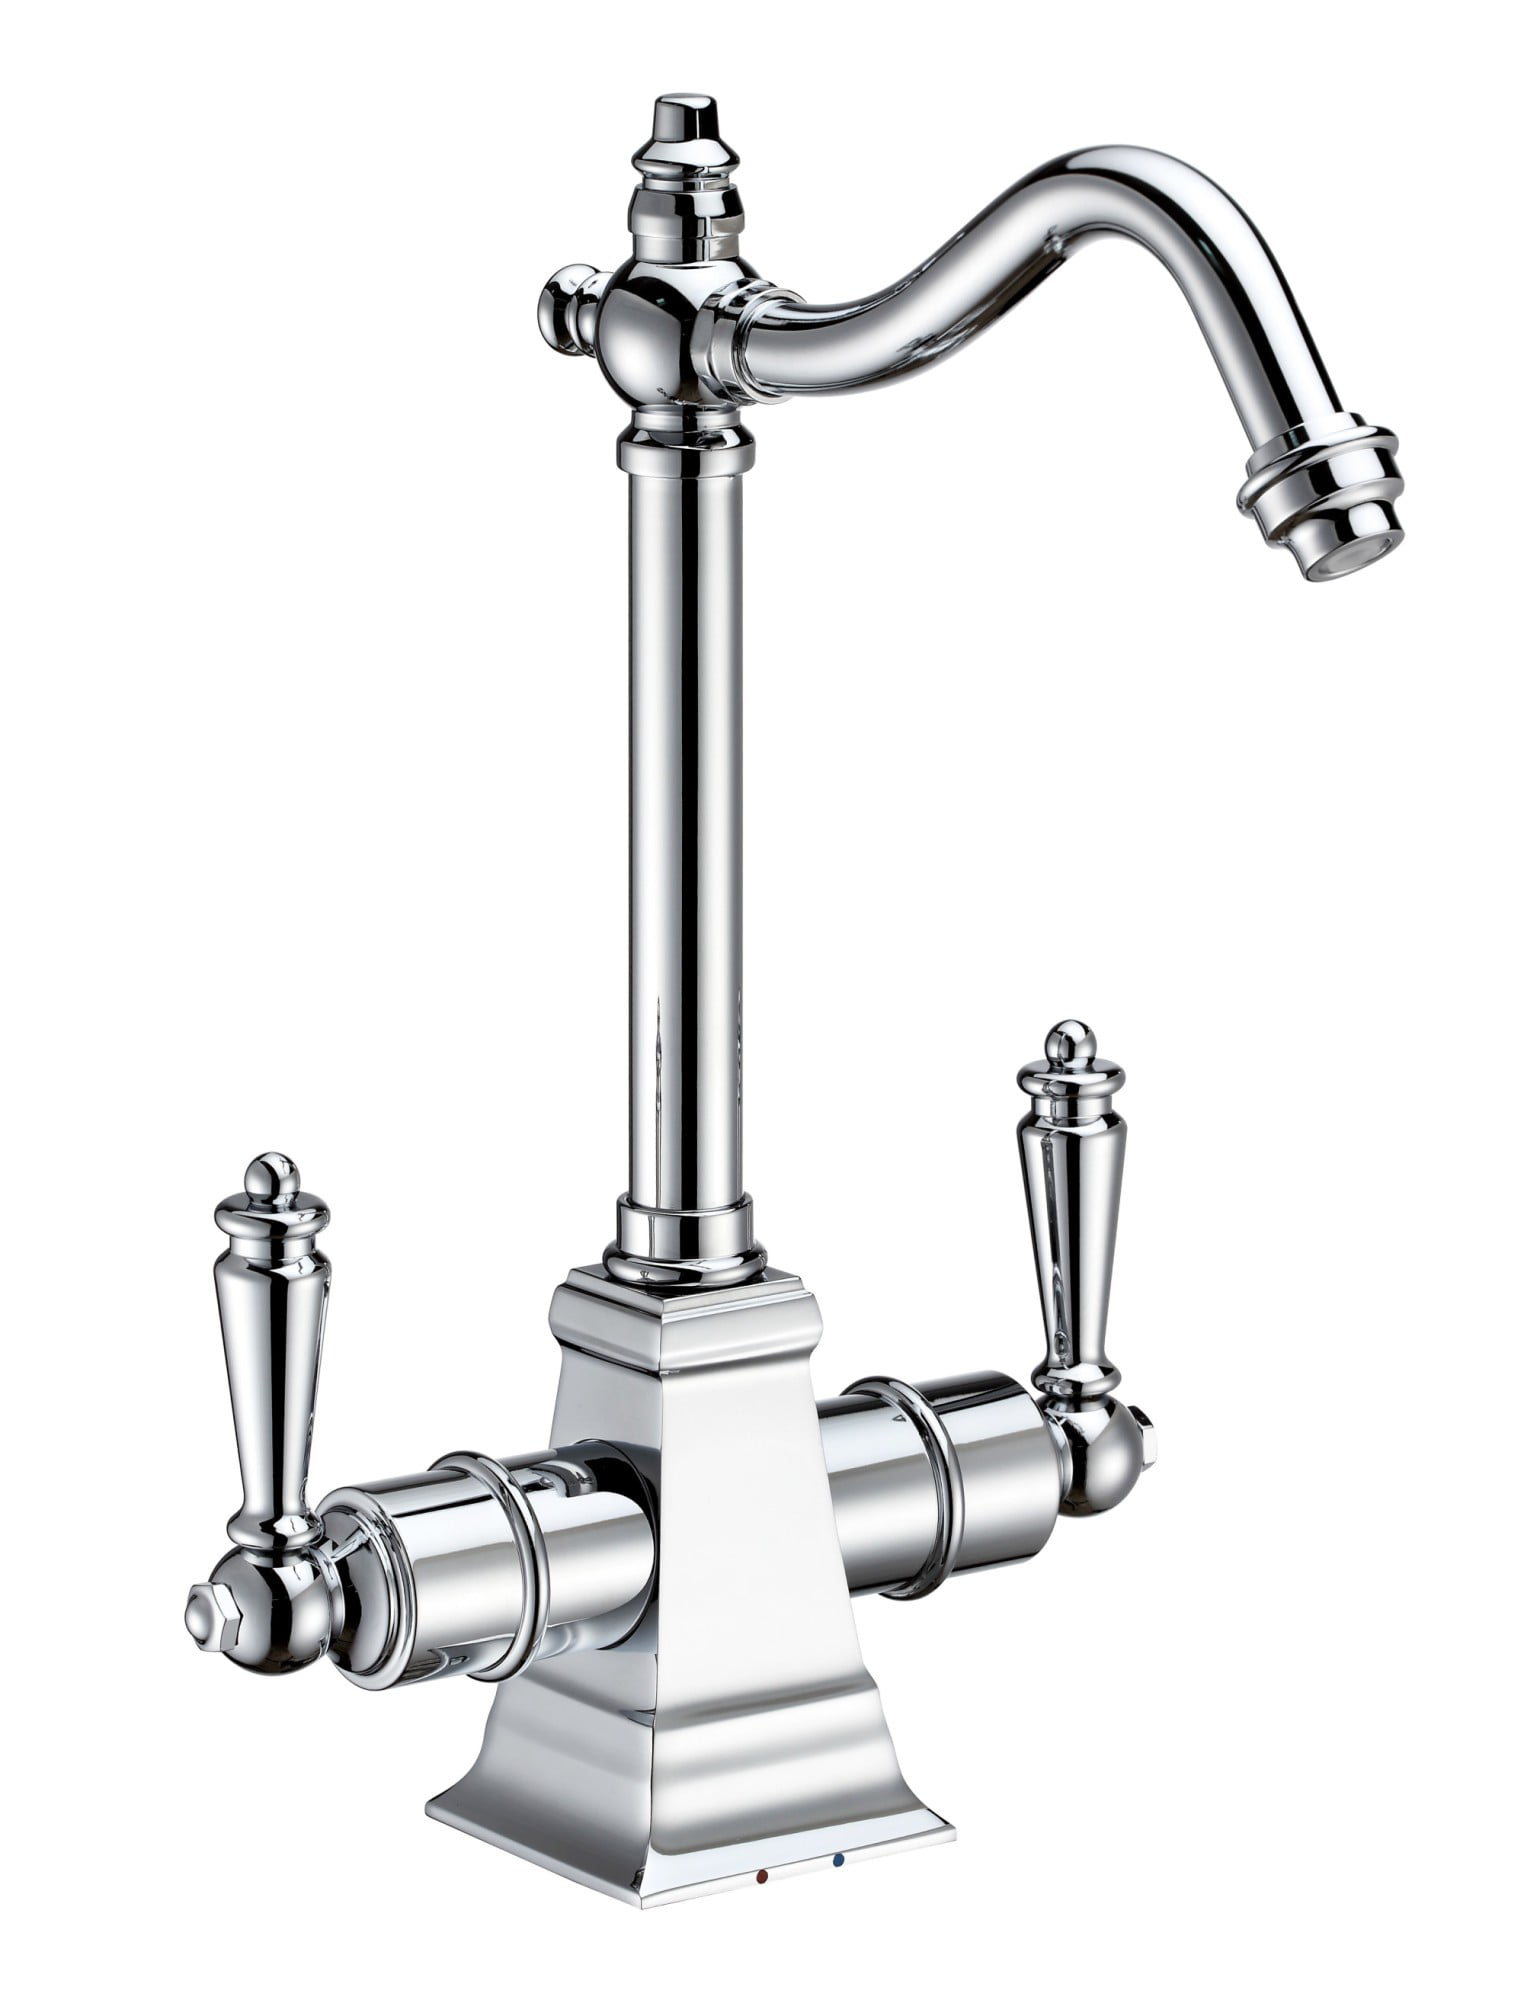 Point of Use Instant Hot & Cold Water Drinking Faucet - Polished Chrome -  LivingQuarters, LI2752743